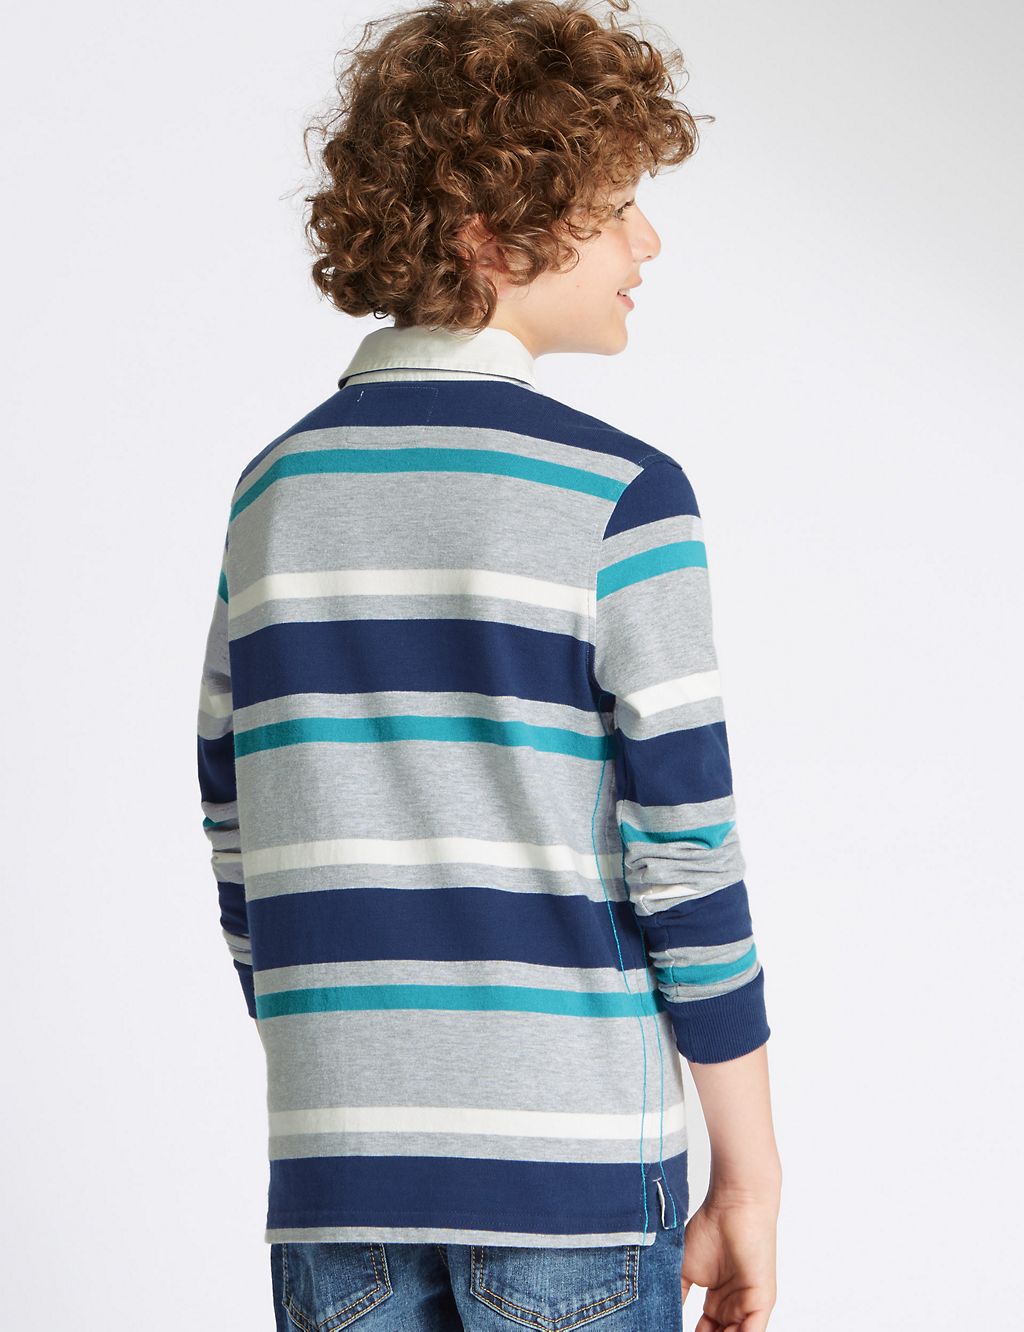 Cotton Rich Striped Rugby Top (5-14 Years) 2 of 6